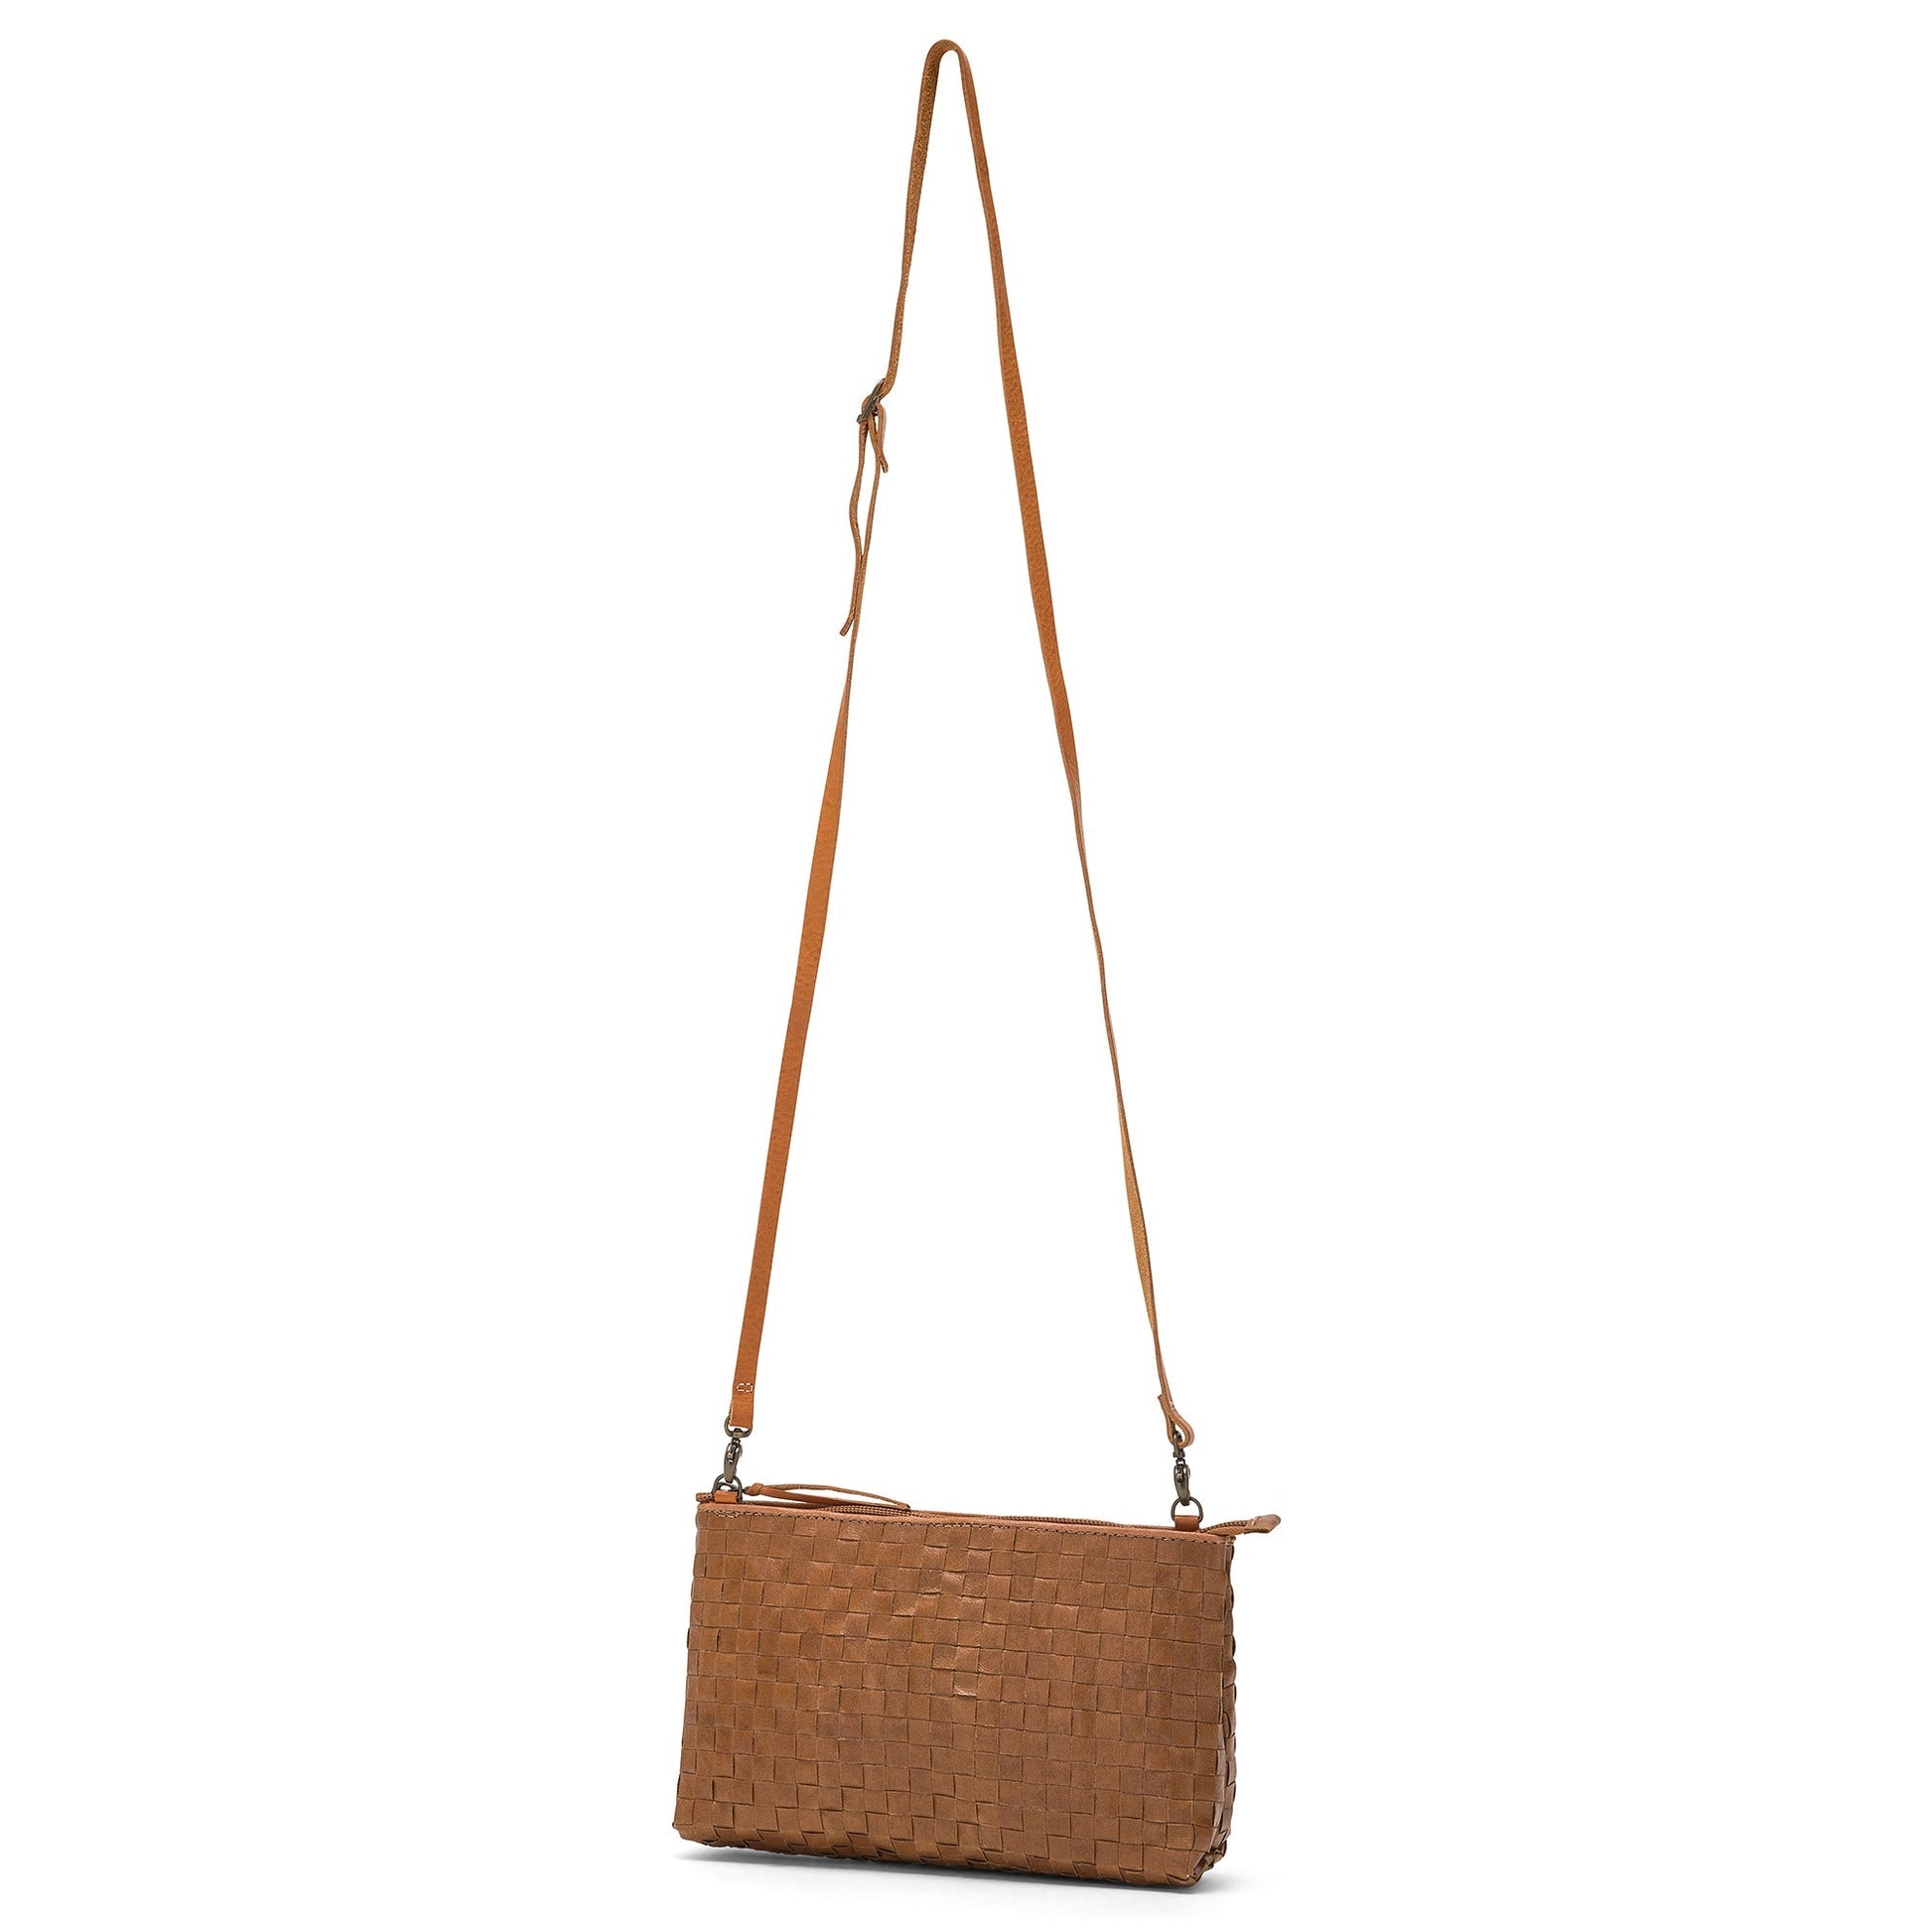 A brown woven washable paper small zip top handbag is shown with a long brown washable paper strap.